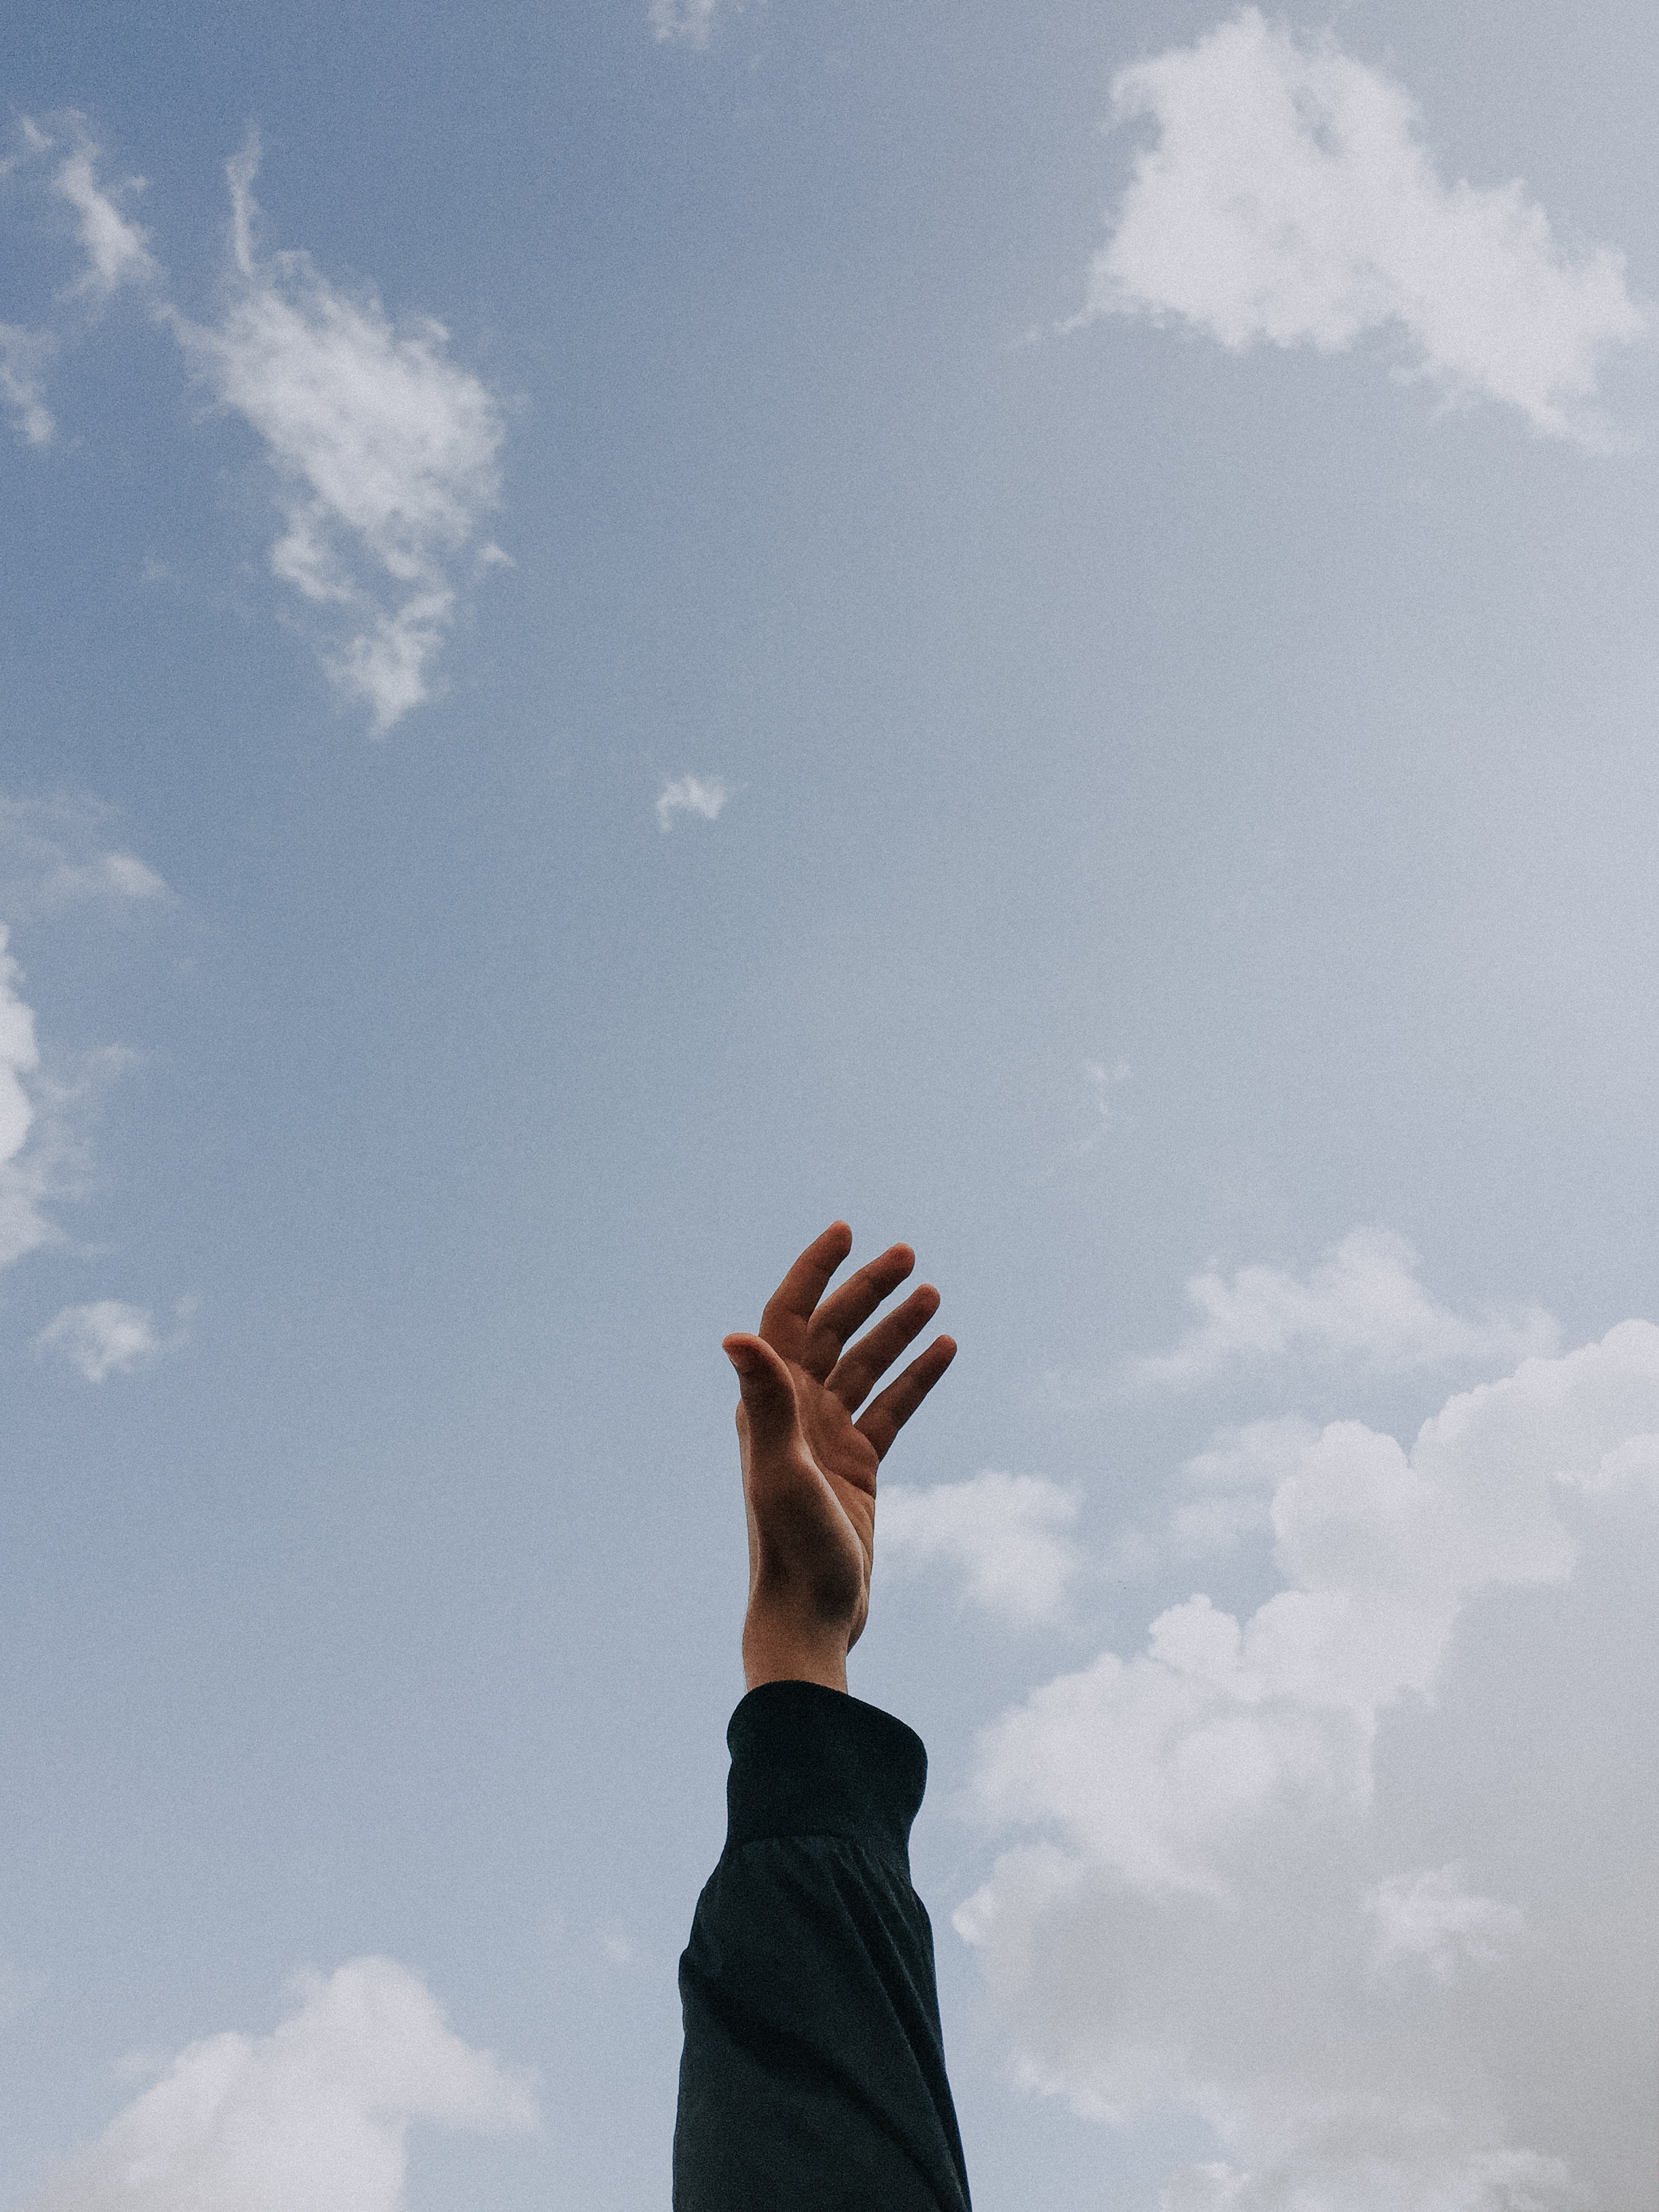 fingers, hand, freedom, minimalism, clouds, sky, lift up, raise